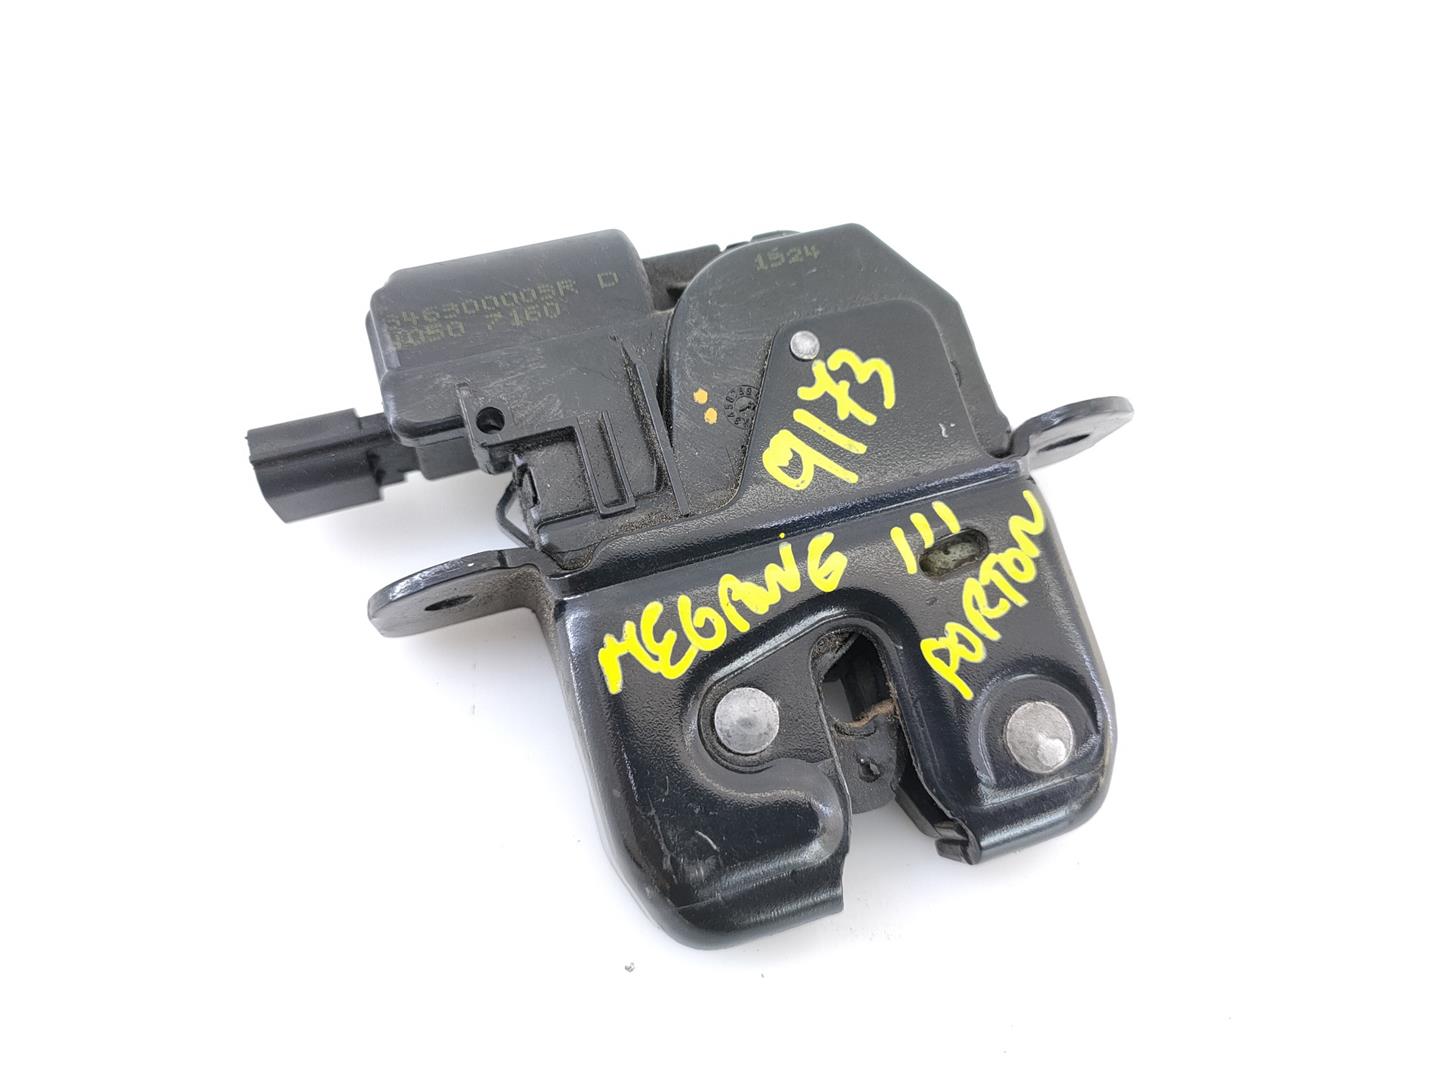 RENAULT Megane 3 generation (2008-2020) Tailgate Boot Lock 846300003R, E1-A1-44-1 20953789